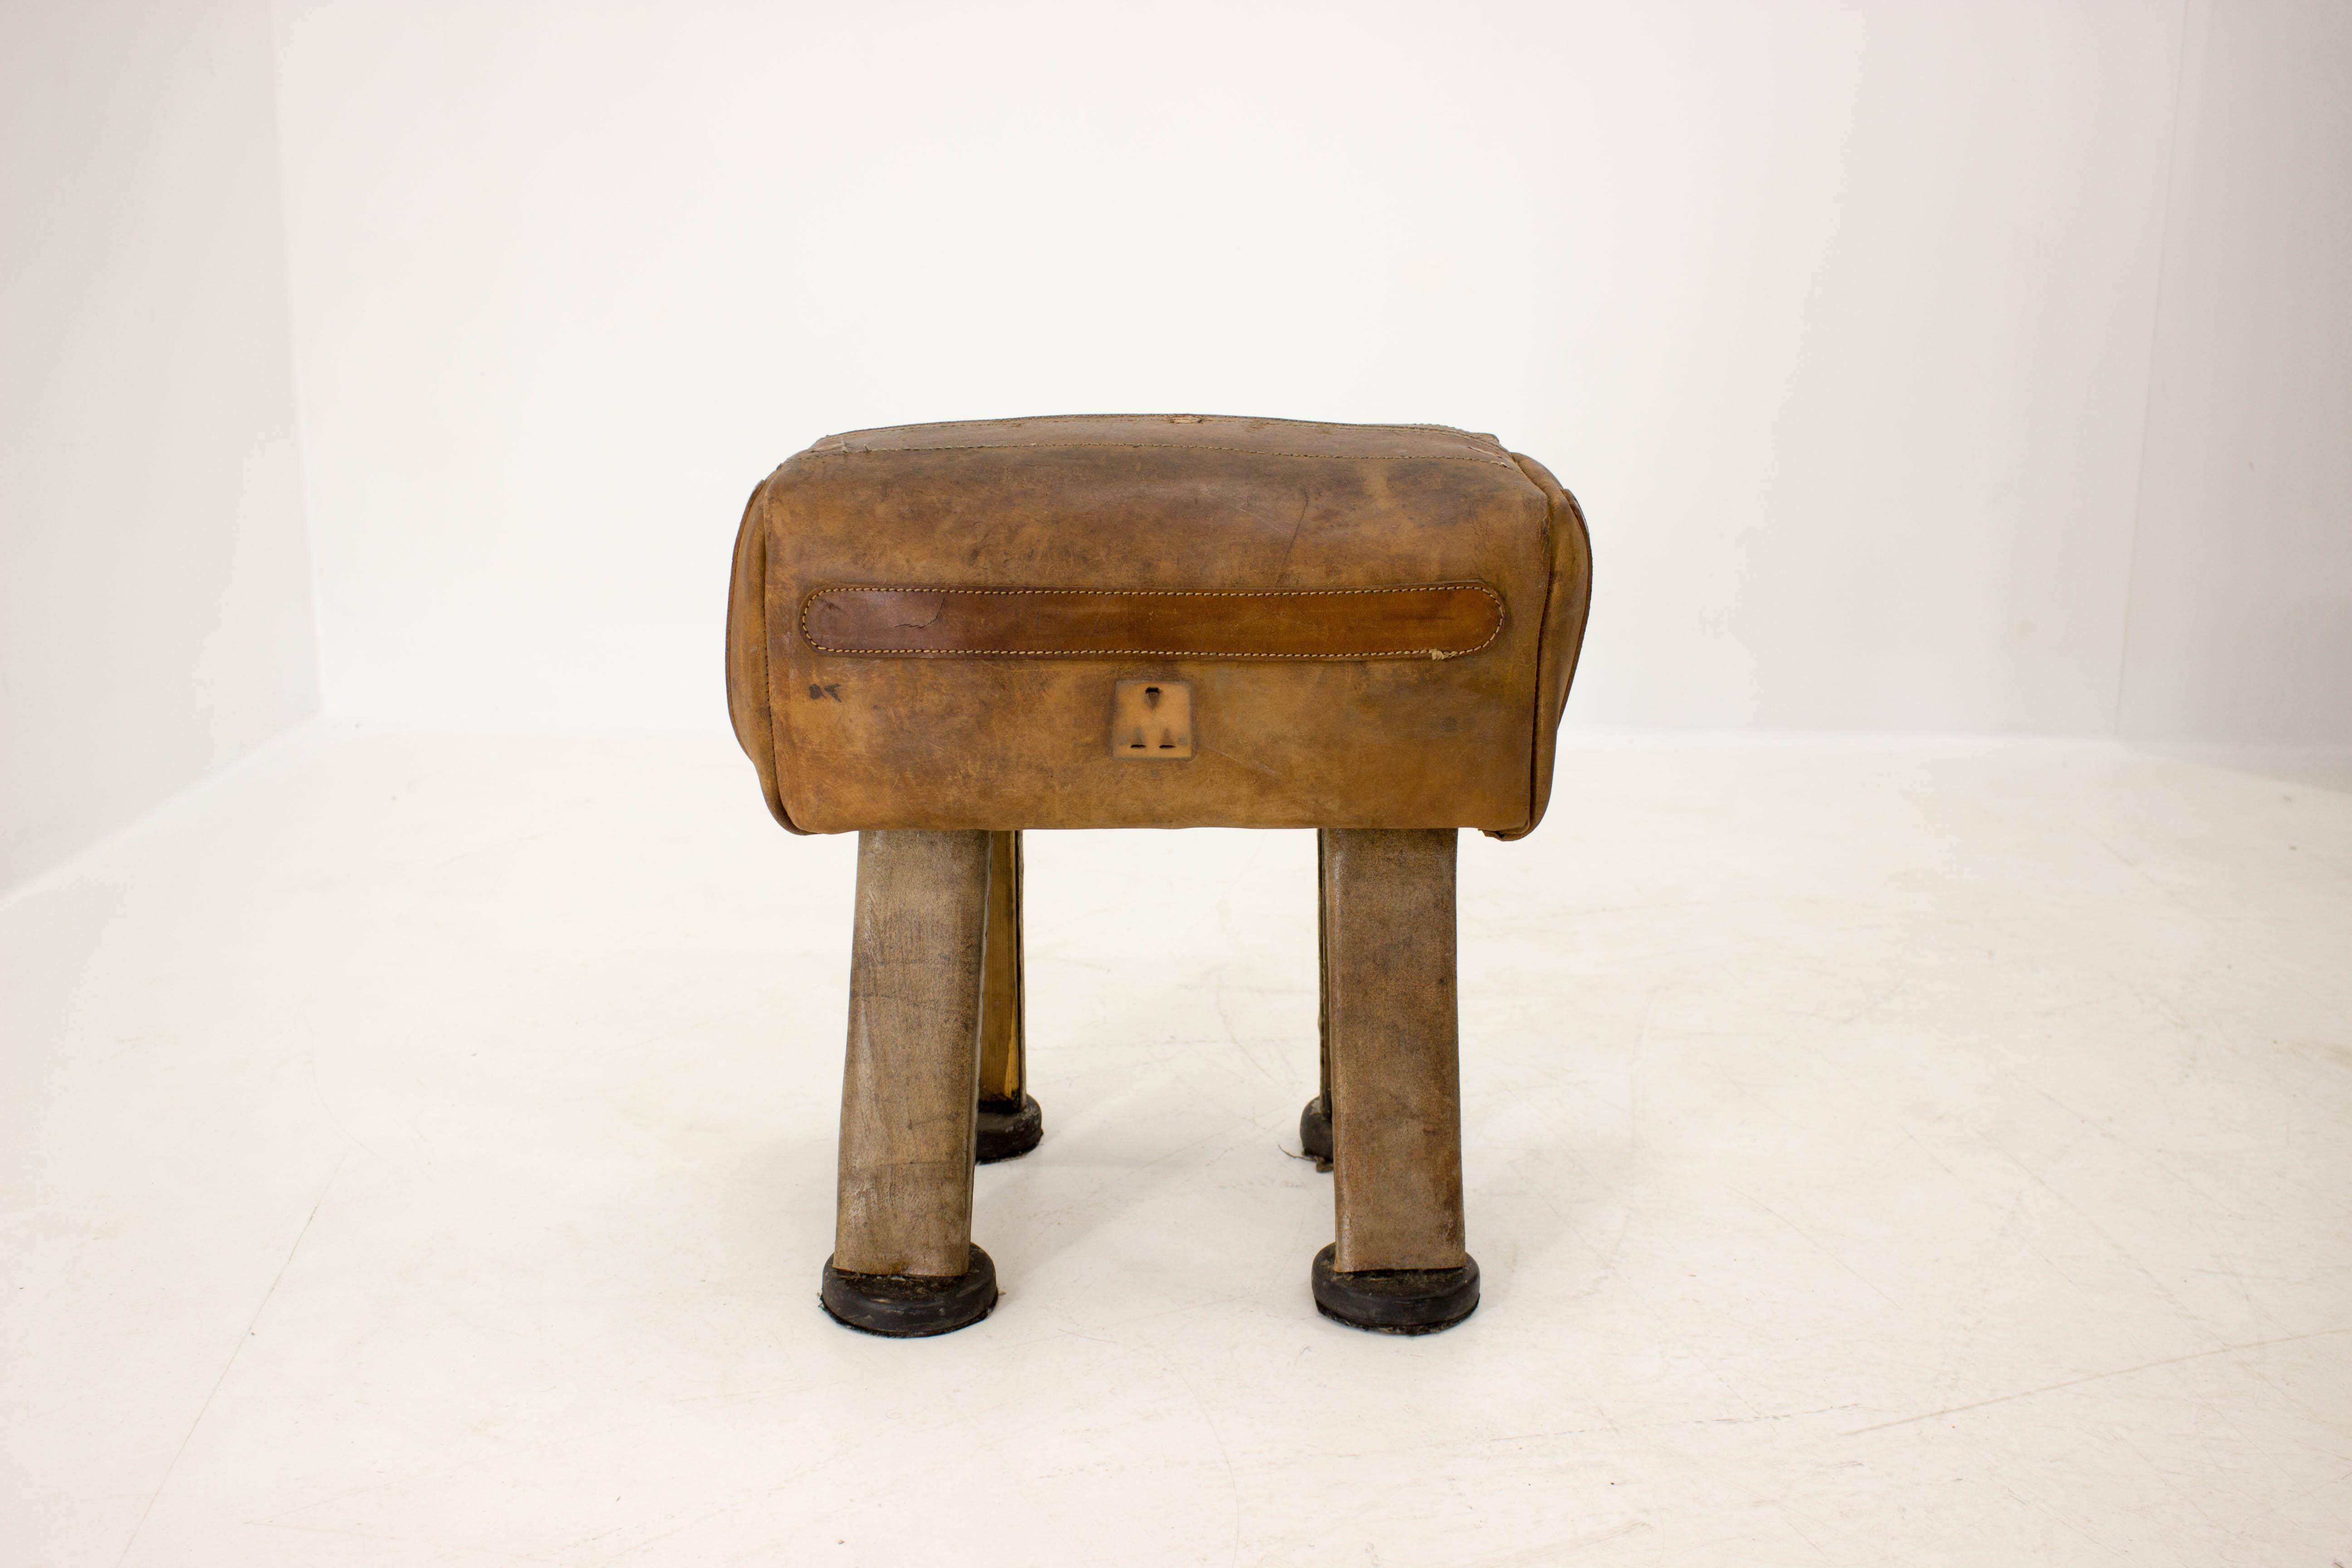 Made of cow skin and wood
Very good original condition with nice patina
Good ice-breaking piece!